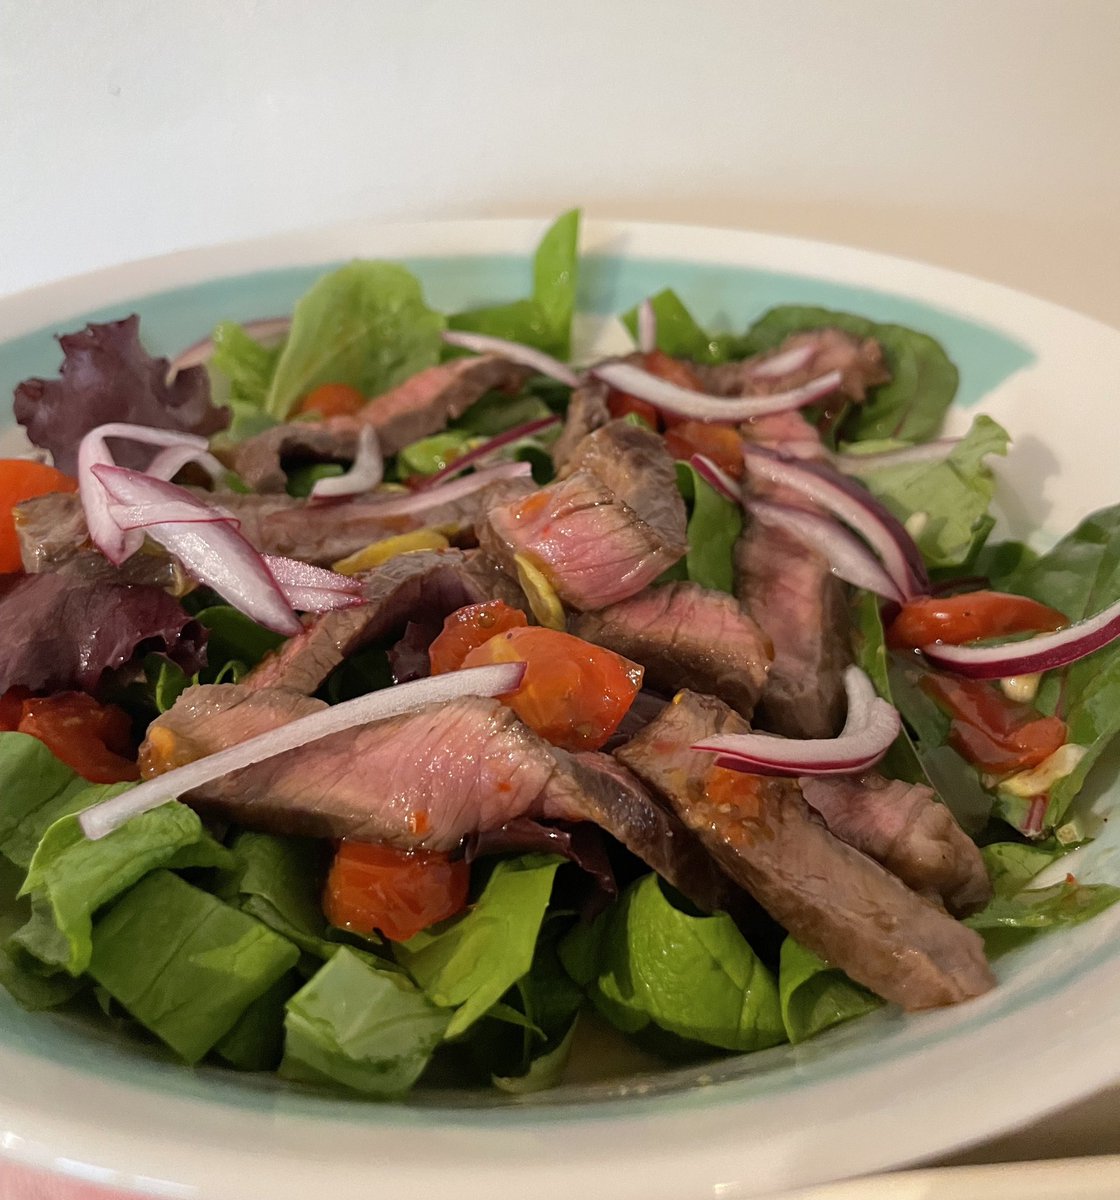 Felt inspired following the @AHDB_BeefLamb #GreatBritishBesfWeek24 event yesterday and bought a few bits from the @deersbrookfarm farm shop - so it’s steak salad for lunch! 🥗 🥩 with on trend pickled onions 🧅